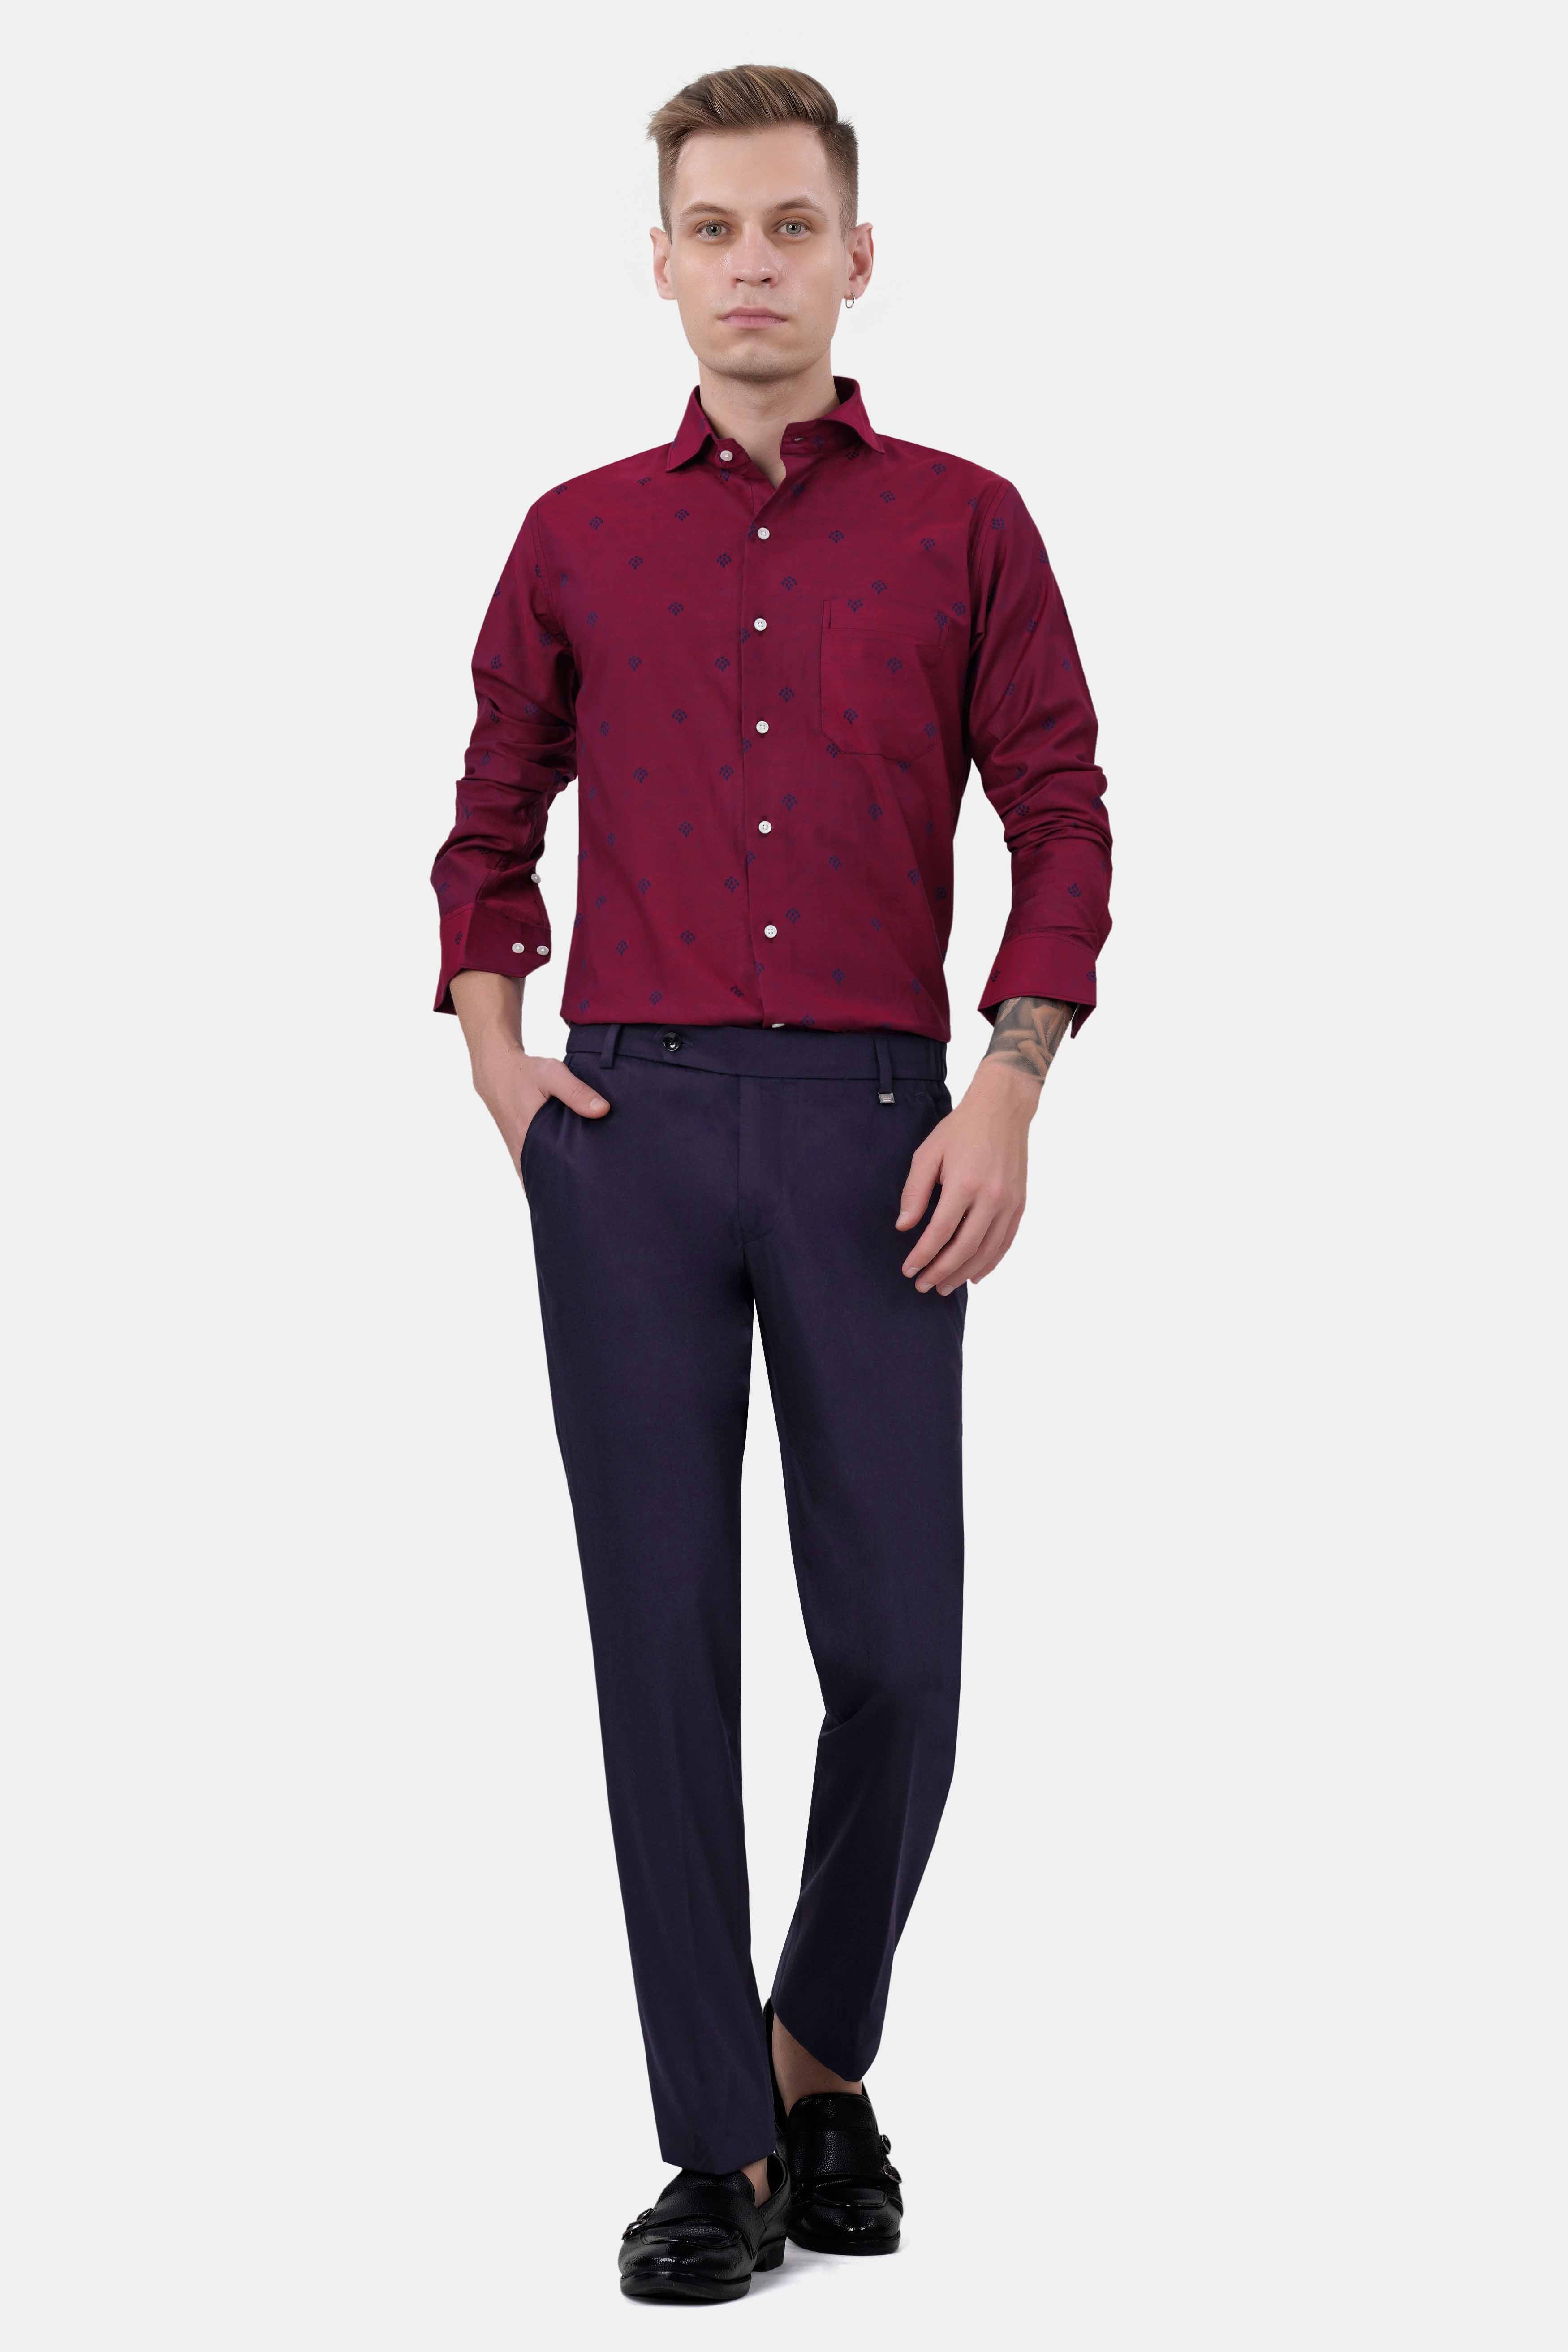 Buy Slim Fit Solid Collar Casual Shirt Maroon and Navy Blue Combo of 2  Cotton for Best Price, Reviews, Free Shipping